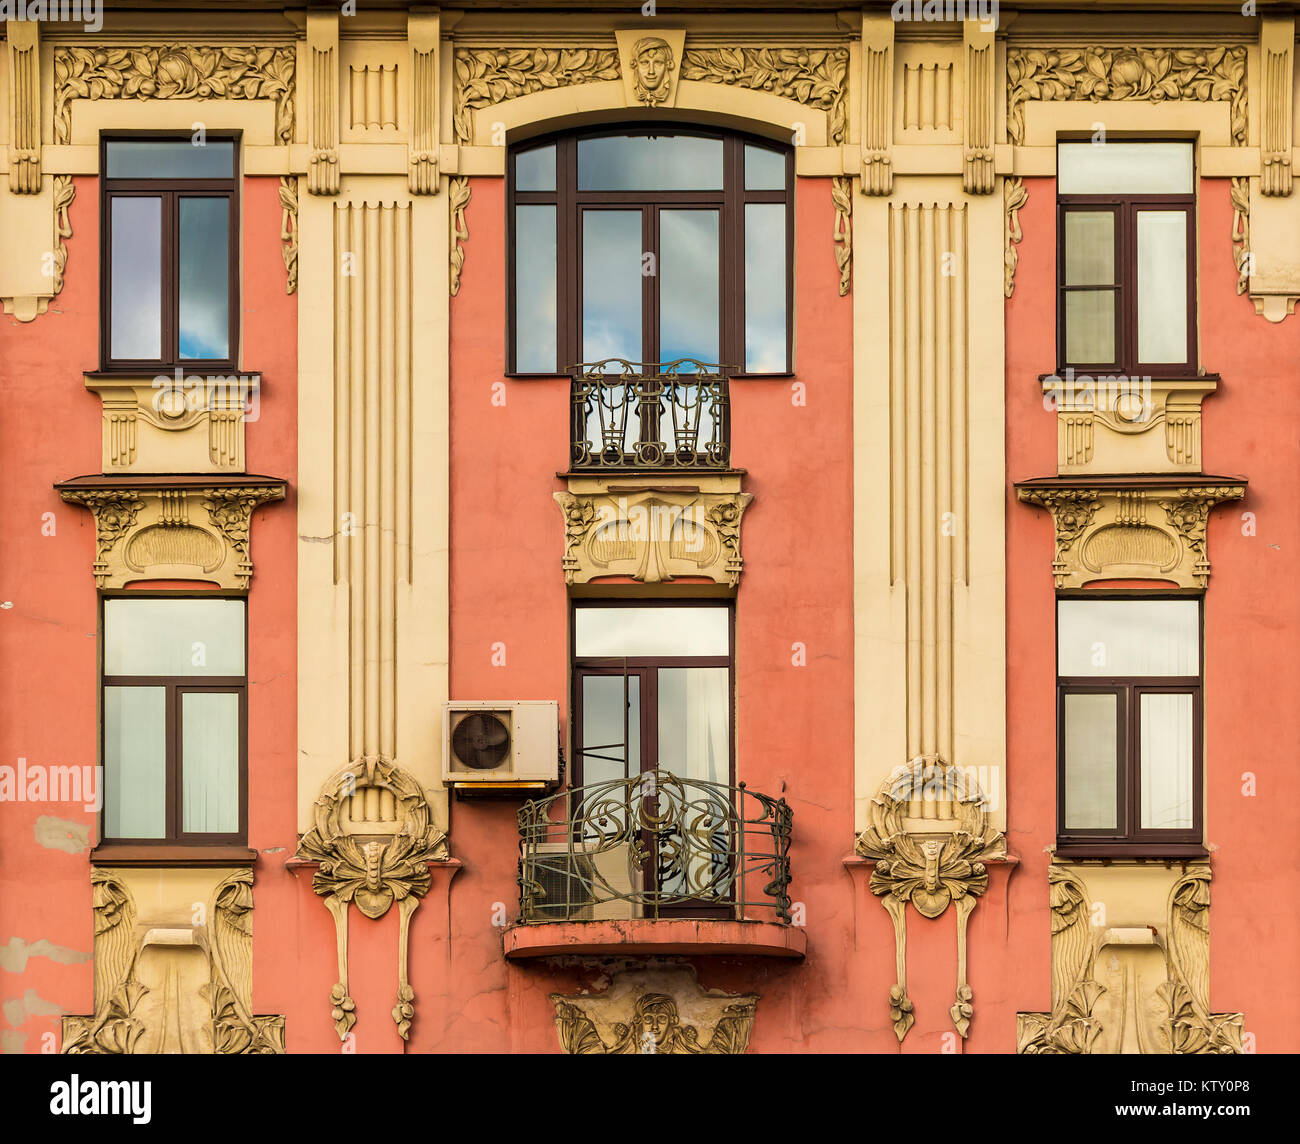 Balcony and several windows in a row on the facade of the urban historic building front view, Saint Petersburg, Russia Stock Photo